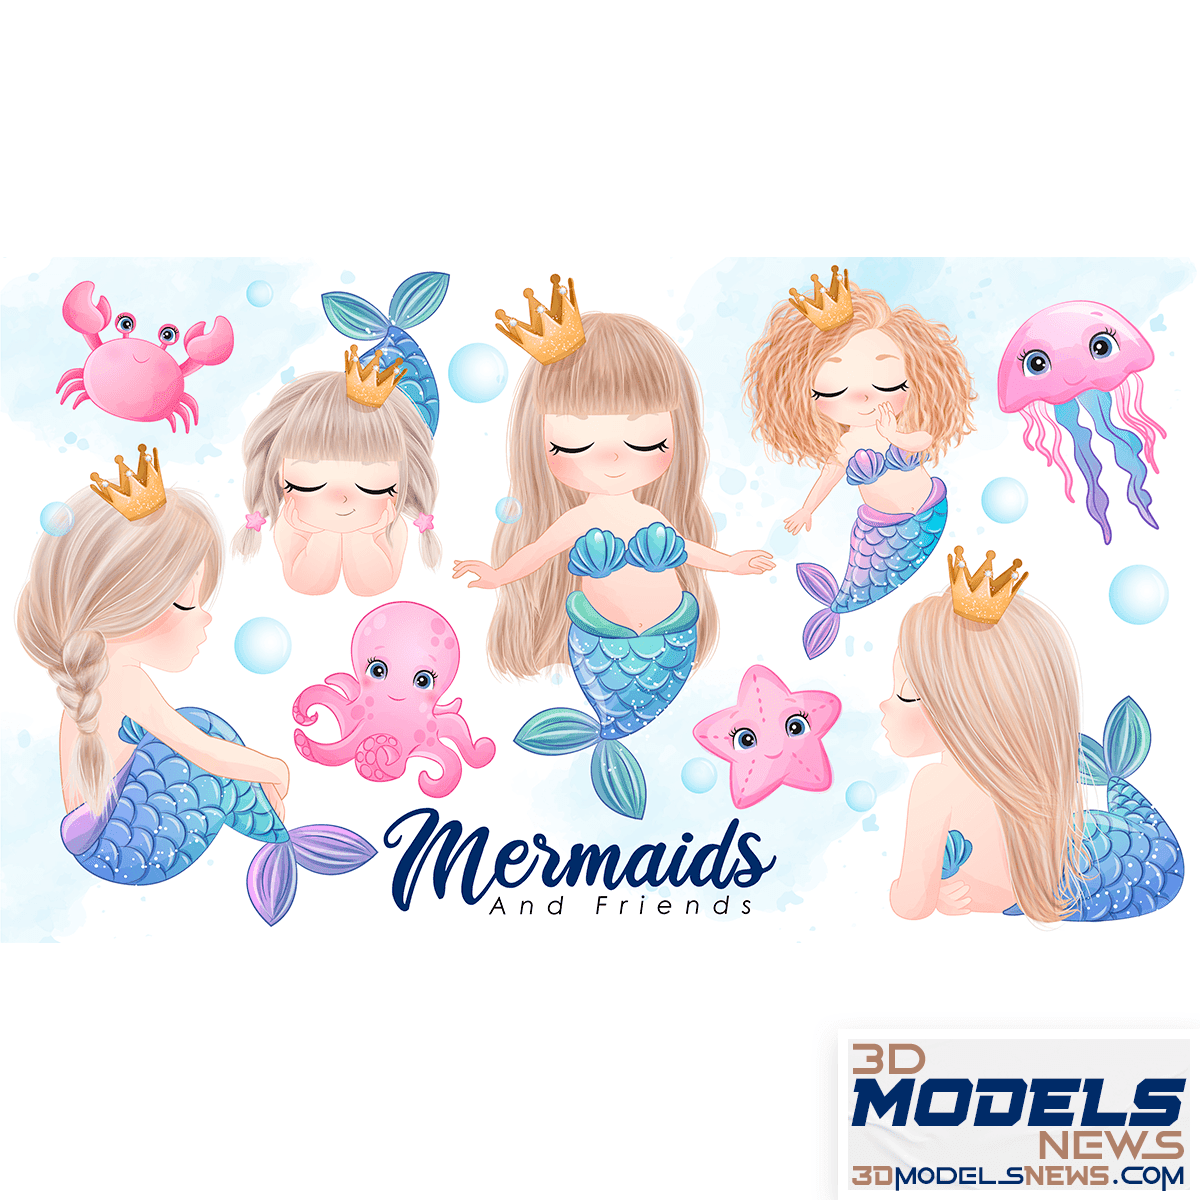 Cute doodle mermaid and friends with watercolor illustration set